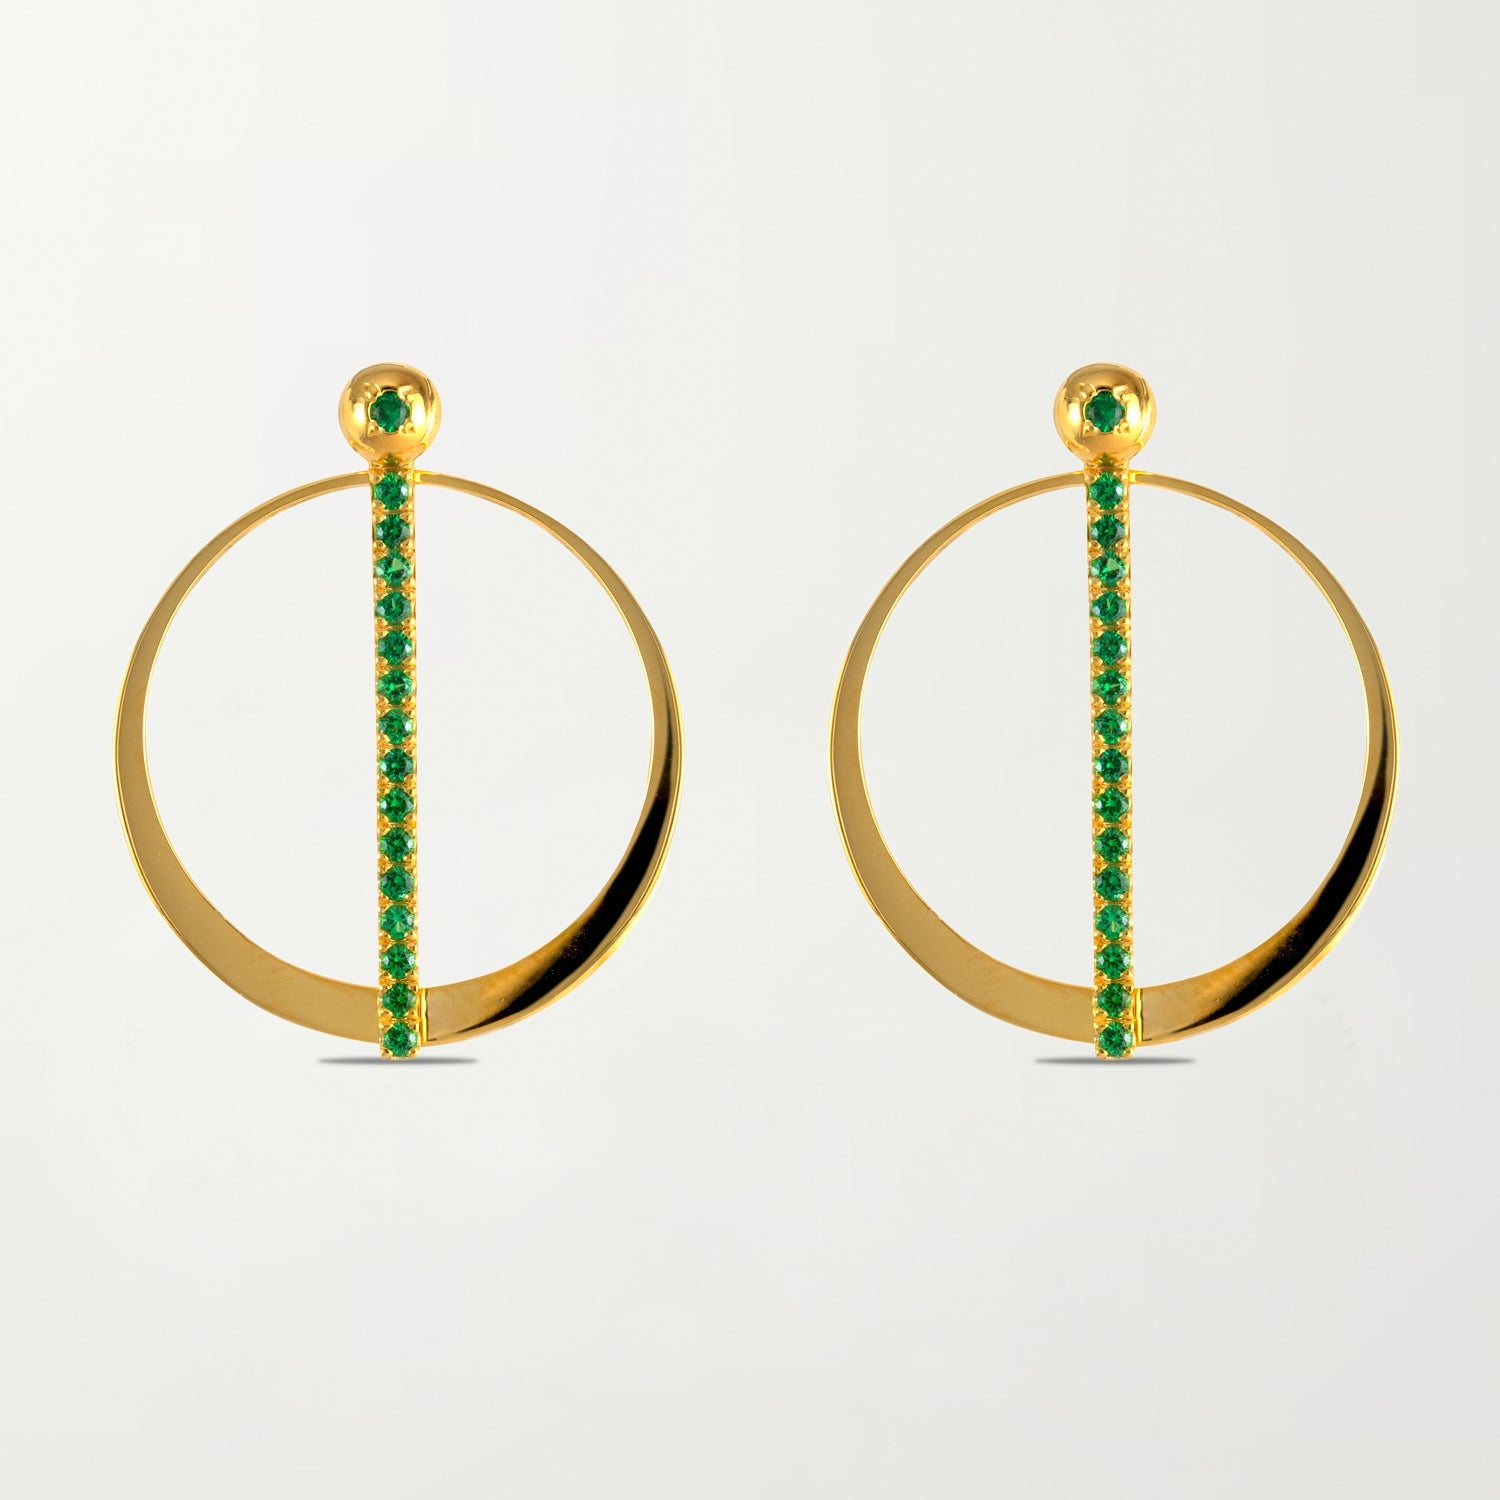 Picture of The Barcelona Earrings in Emerald Green